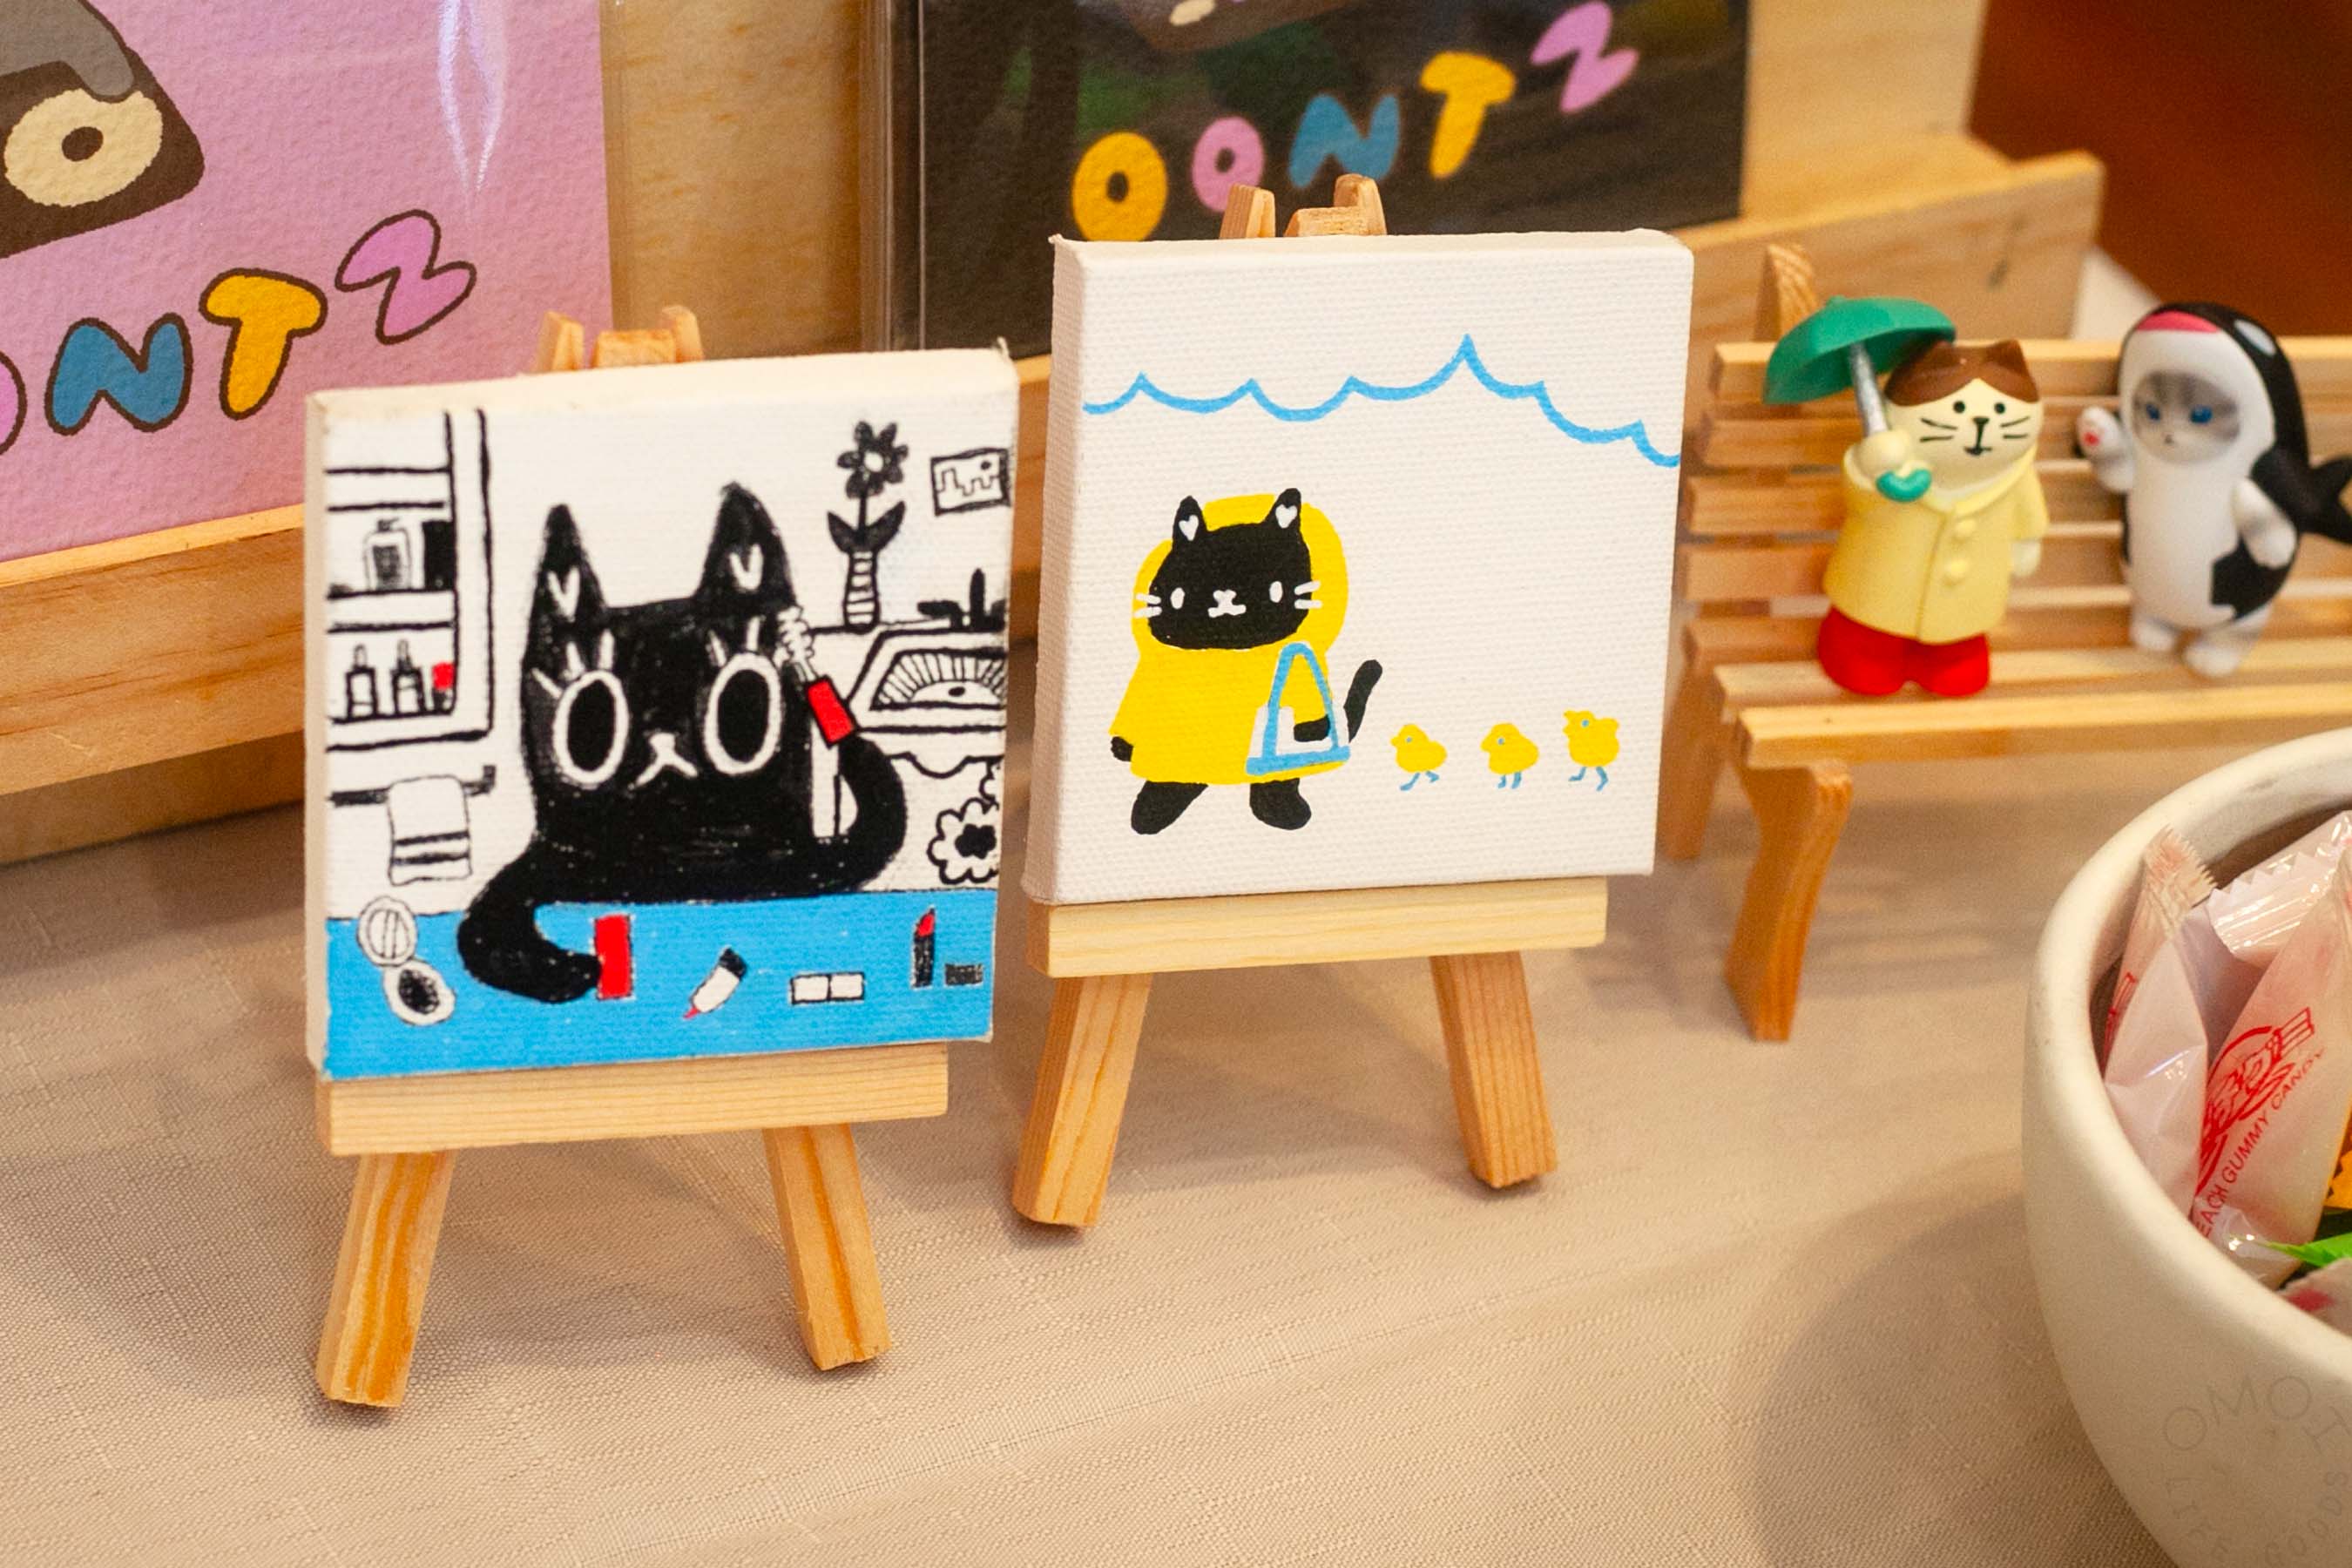 Tiny easels hold some Hannah Vy originals. Cute cat illustrations. One puts on makeup, another walks in the rain with some duckies.